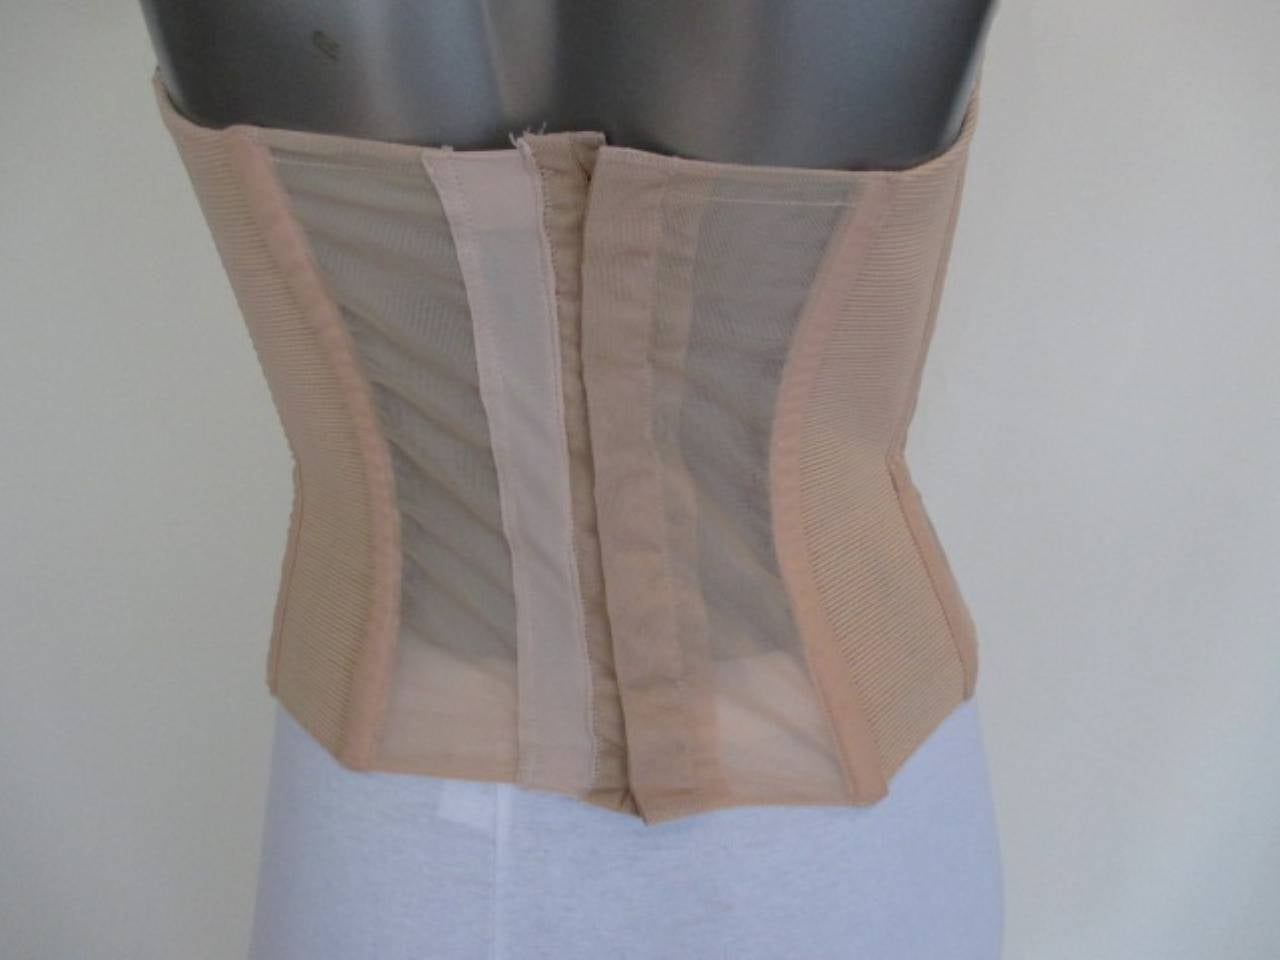 Thierry Mugler classic corset , flesh color with hooks to close and stays.
Size is france 40 but fits like 36 EU size

Measurements,
waist : 66 cm
side length: 23 cm
bust size : 70 cm
cup size : 16 diagonal